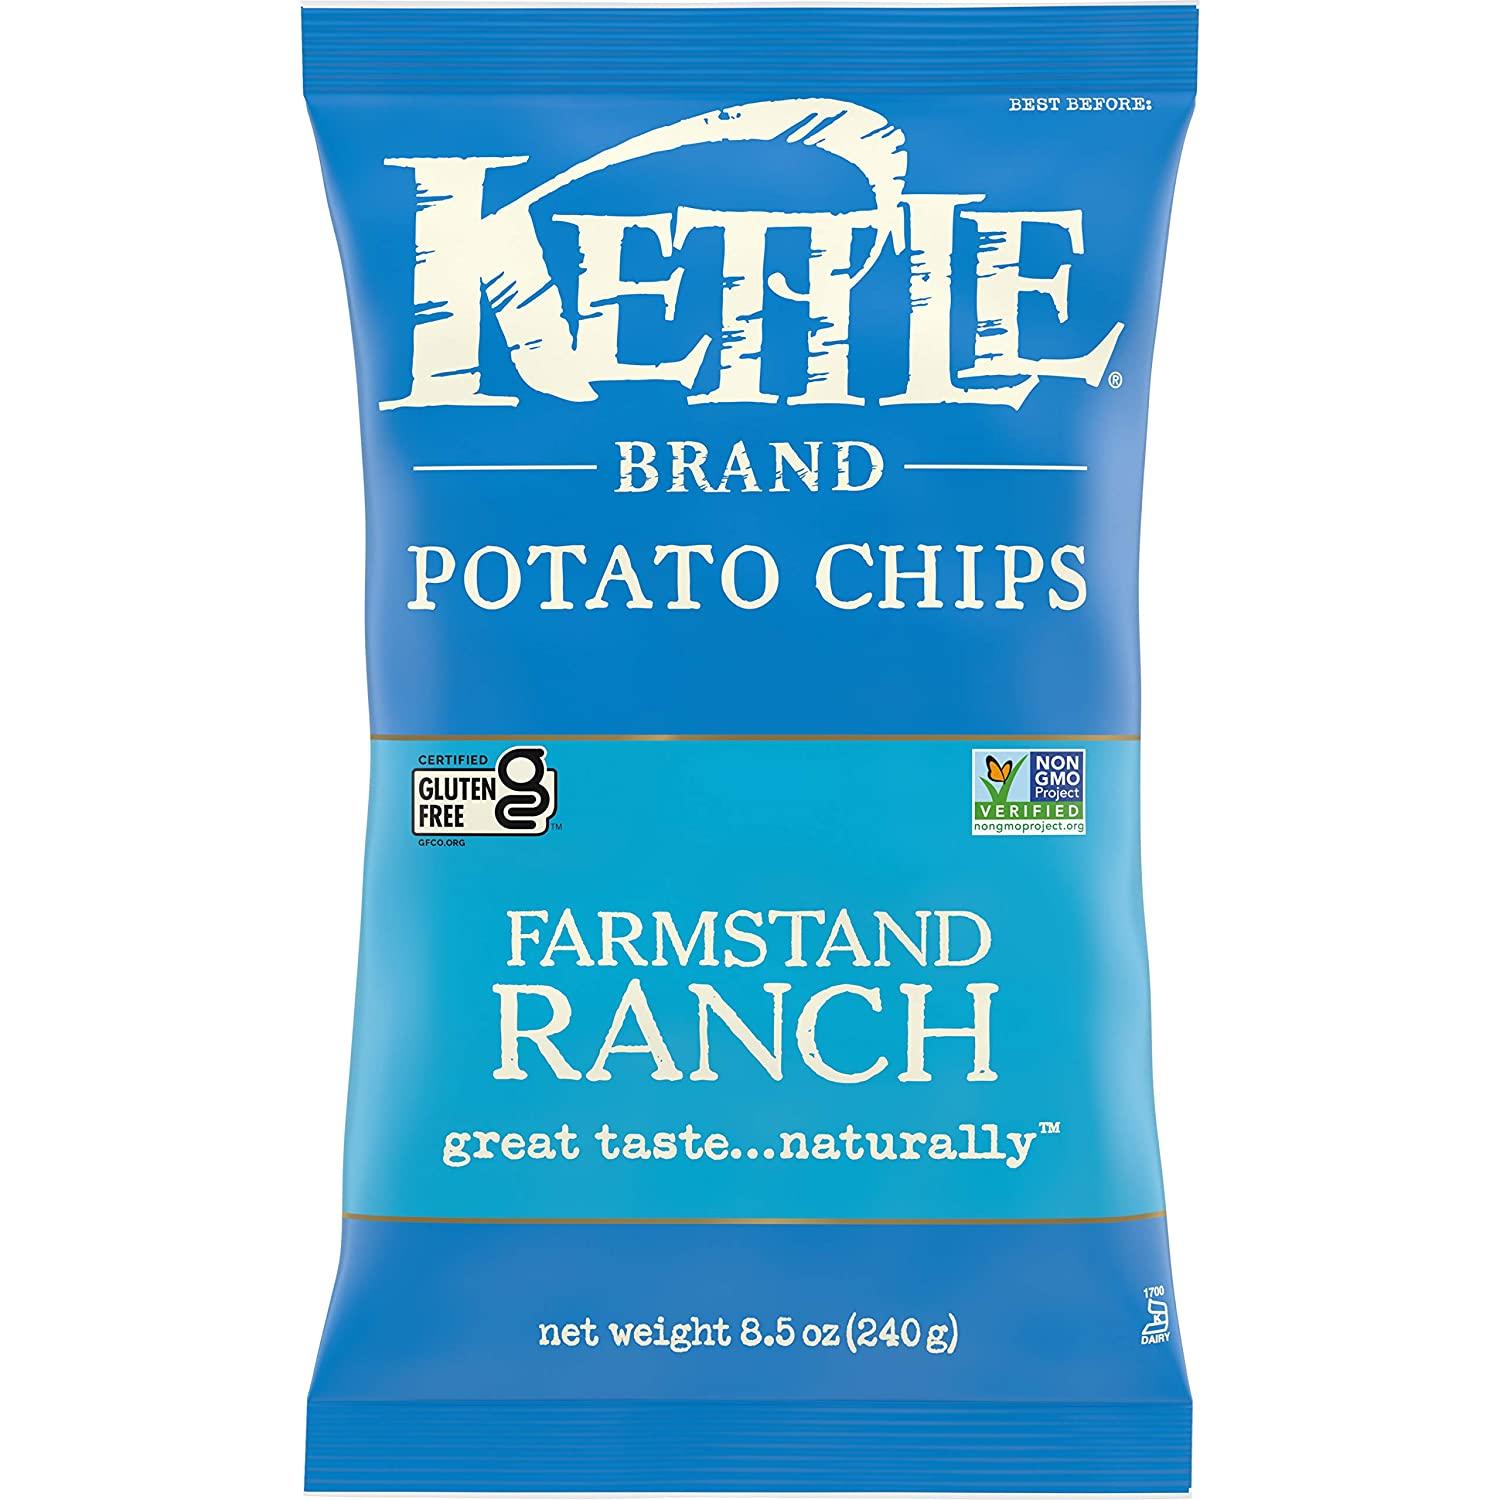 Kettle Brand Farmstand Ranch Potato Chips for $2.10 Shipped